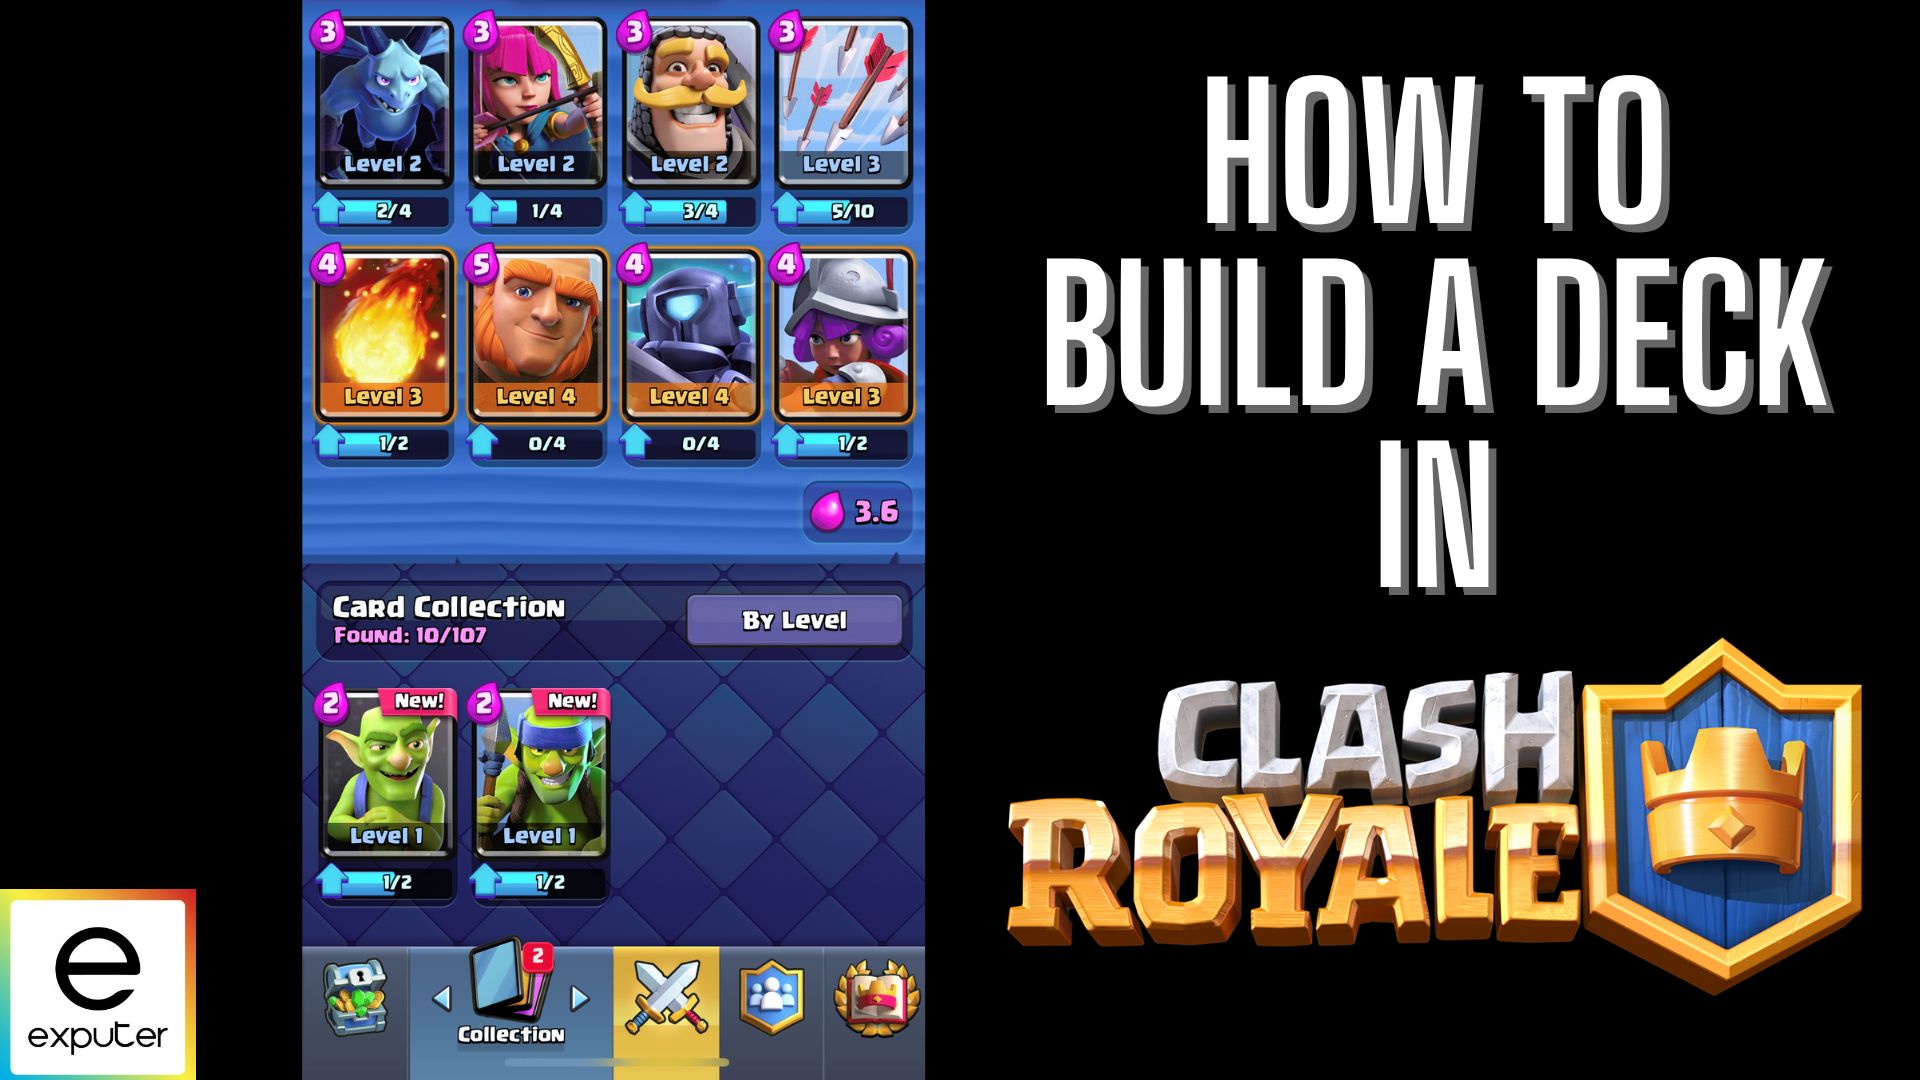 Clash royale how to build a deck